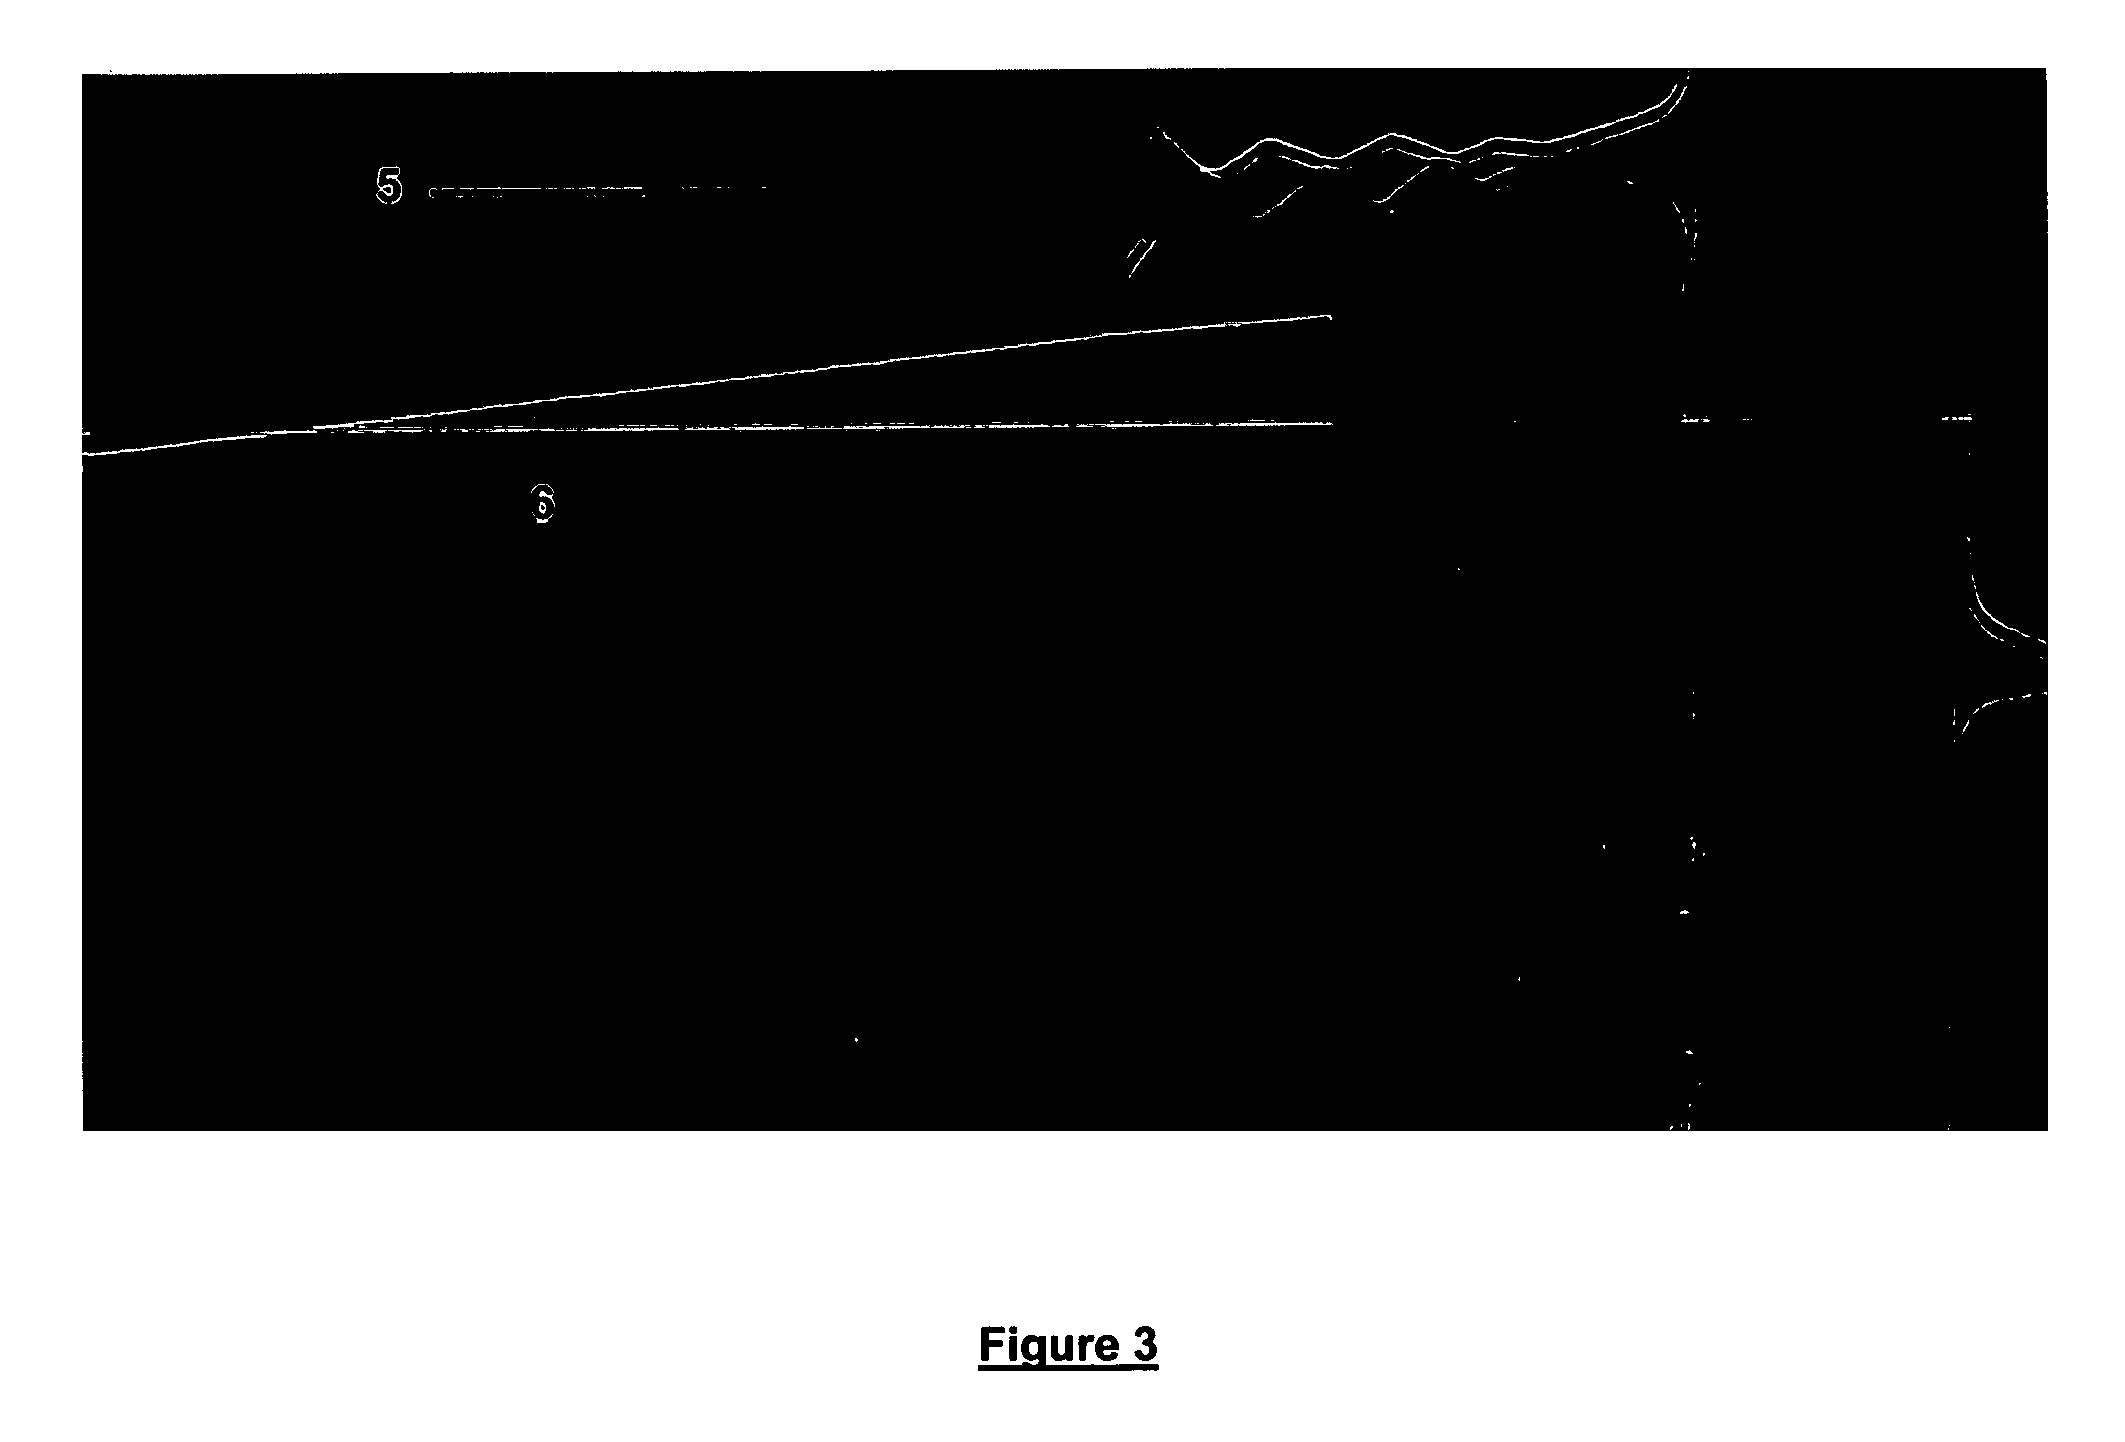 Process for anodically coating aluminum and/or titanium with ceramic oxides